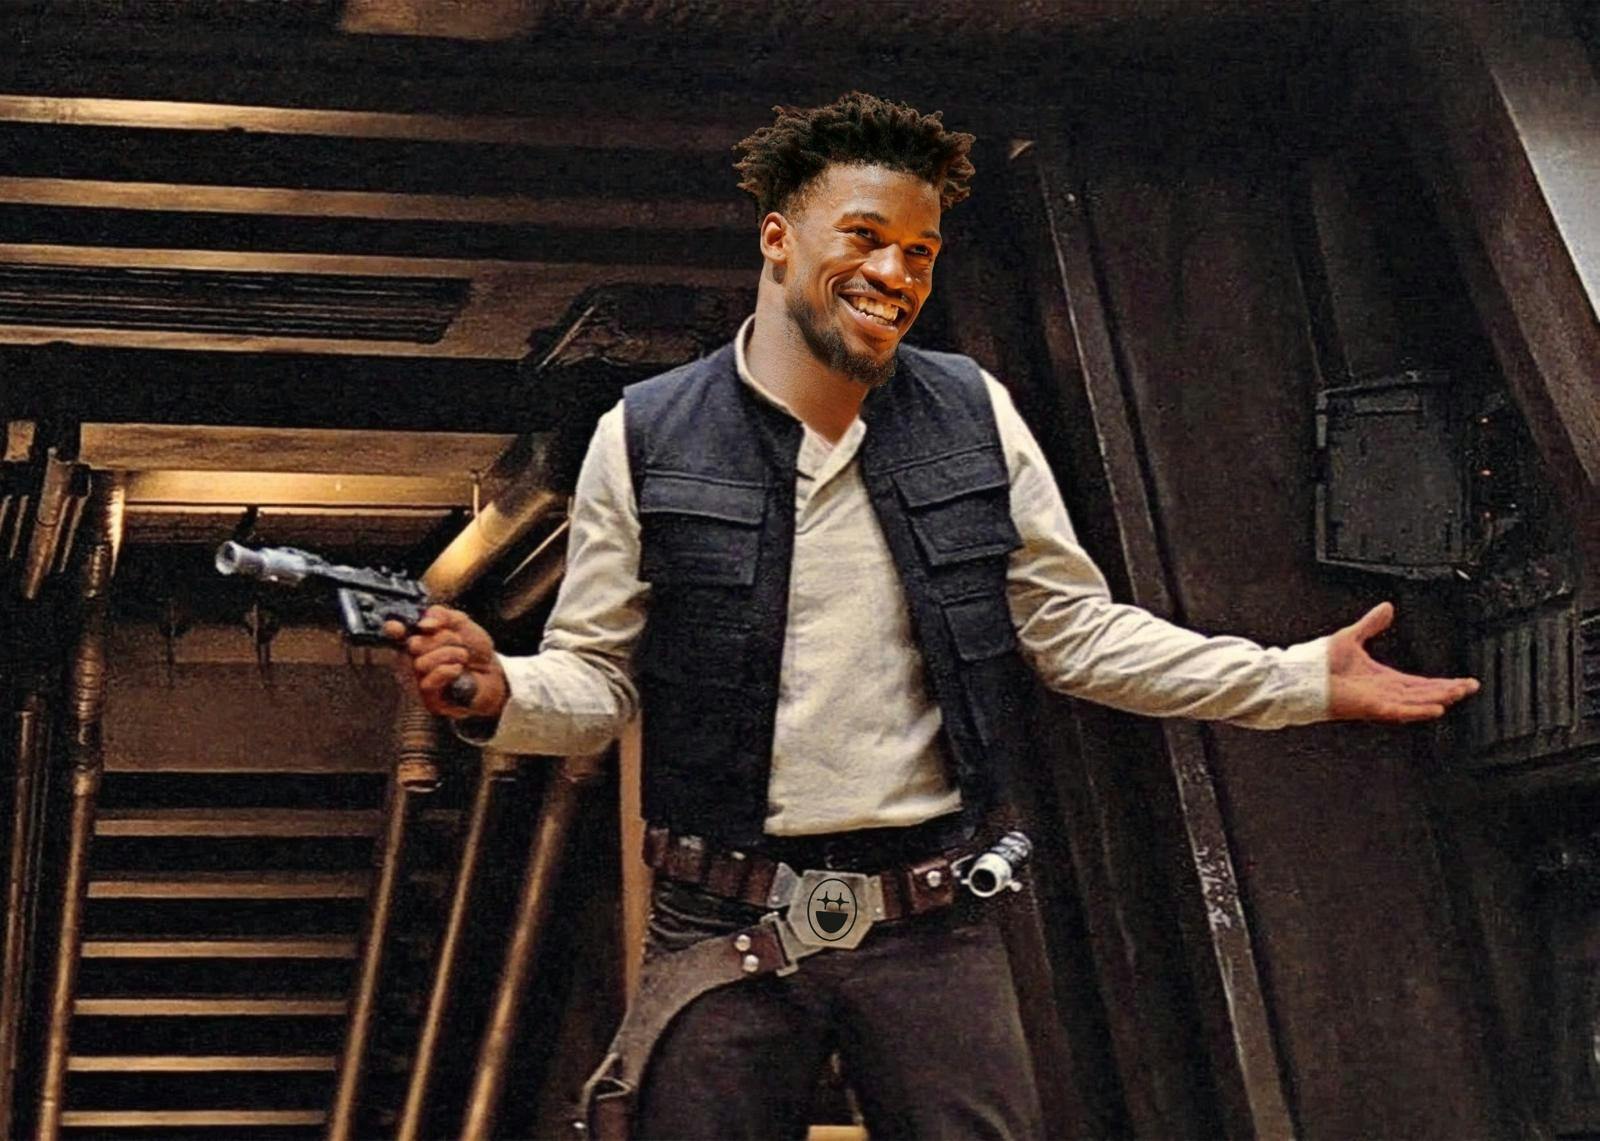 Star Wars Day: Miami Heat As Their Star Wars Counterparts